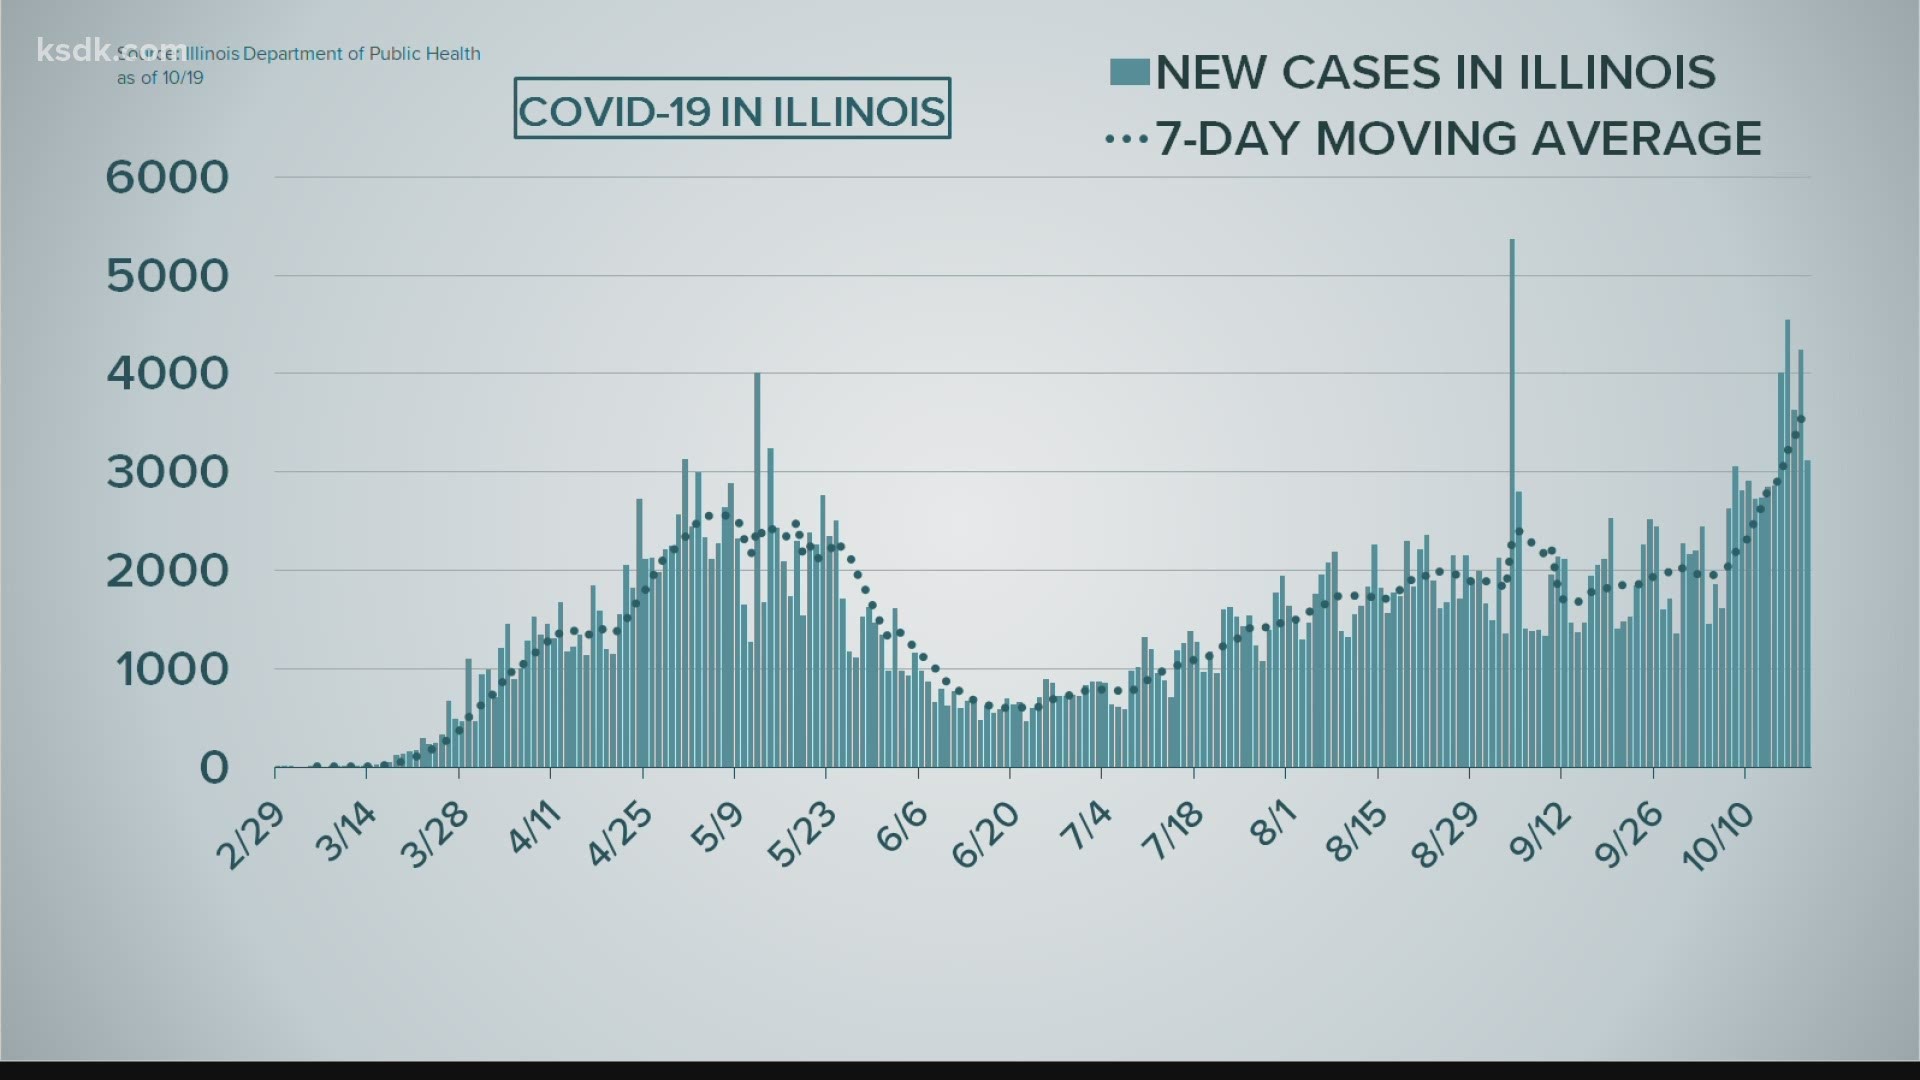 More than four thousand cases were reported on three of the past four days